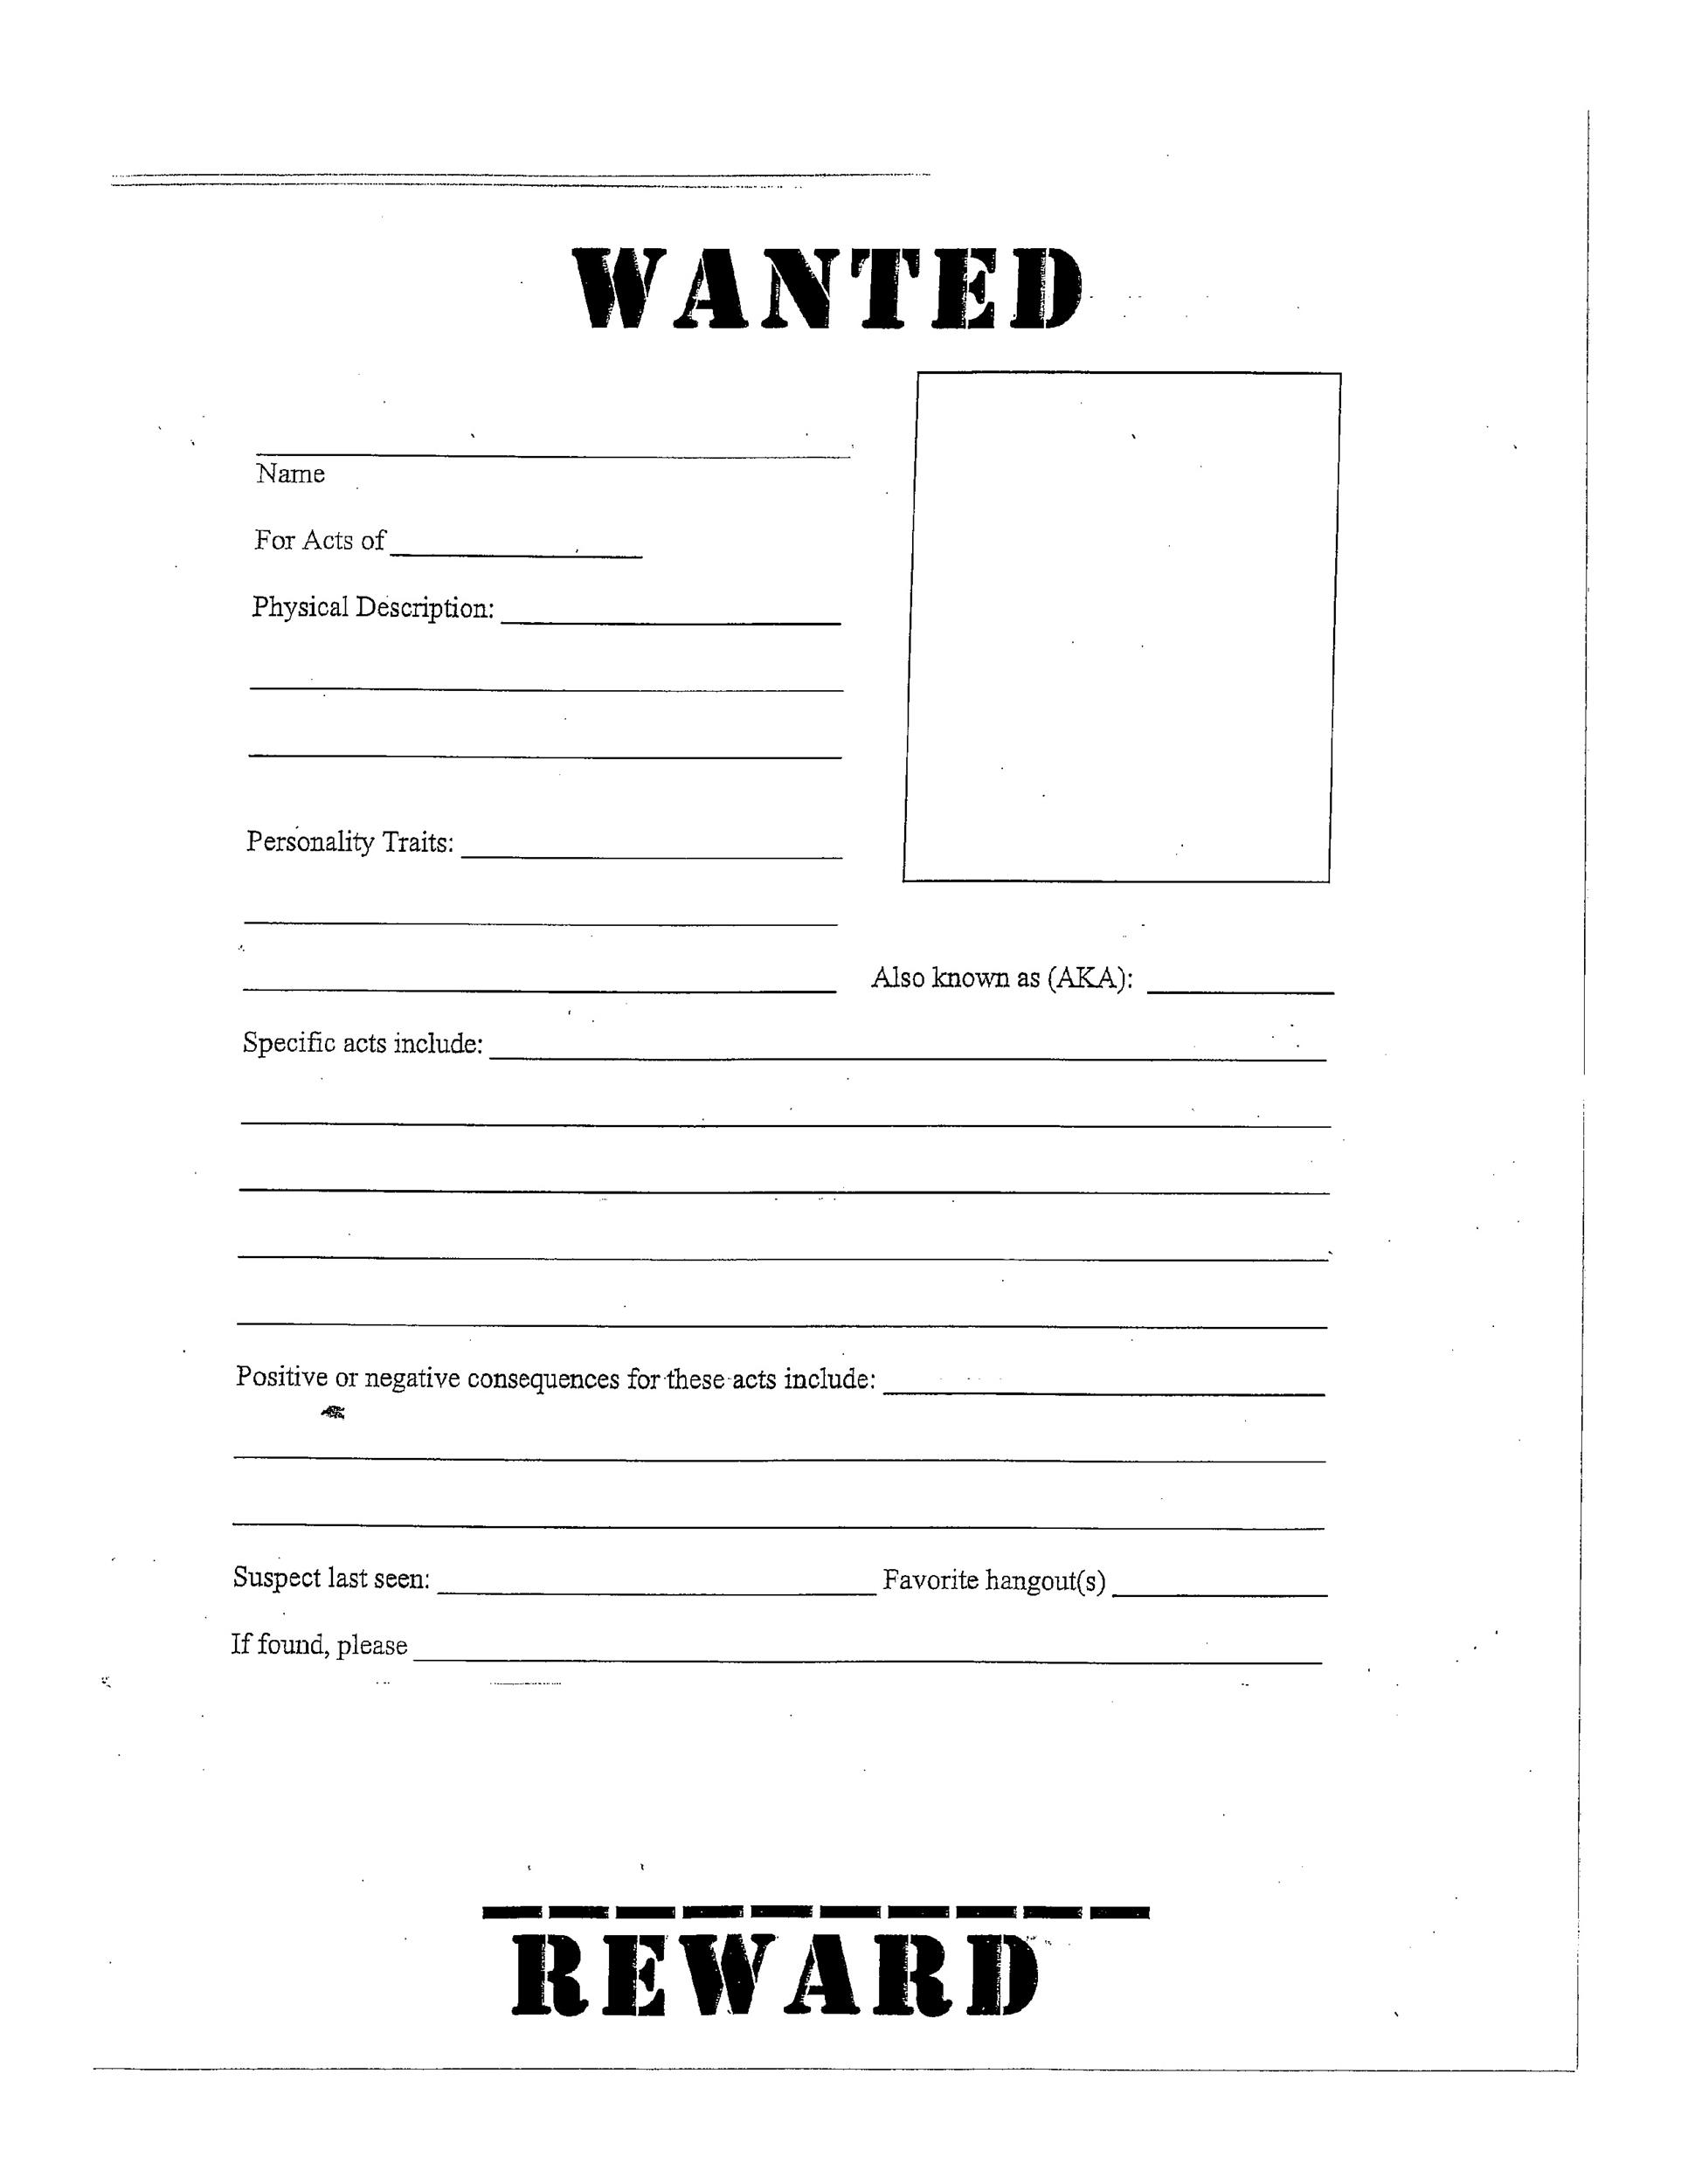 old-fashioned-wanted-poster-template-wanted-poster-vintage-template-depositphotos-posters